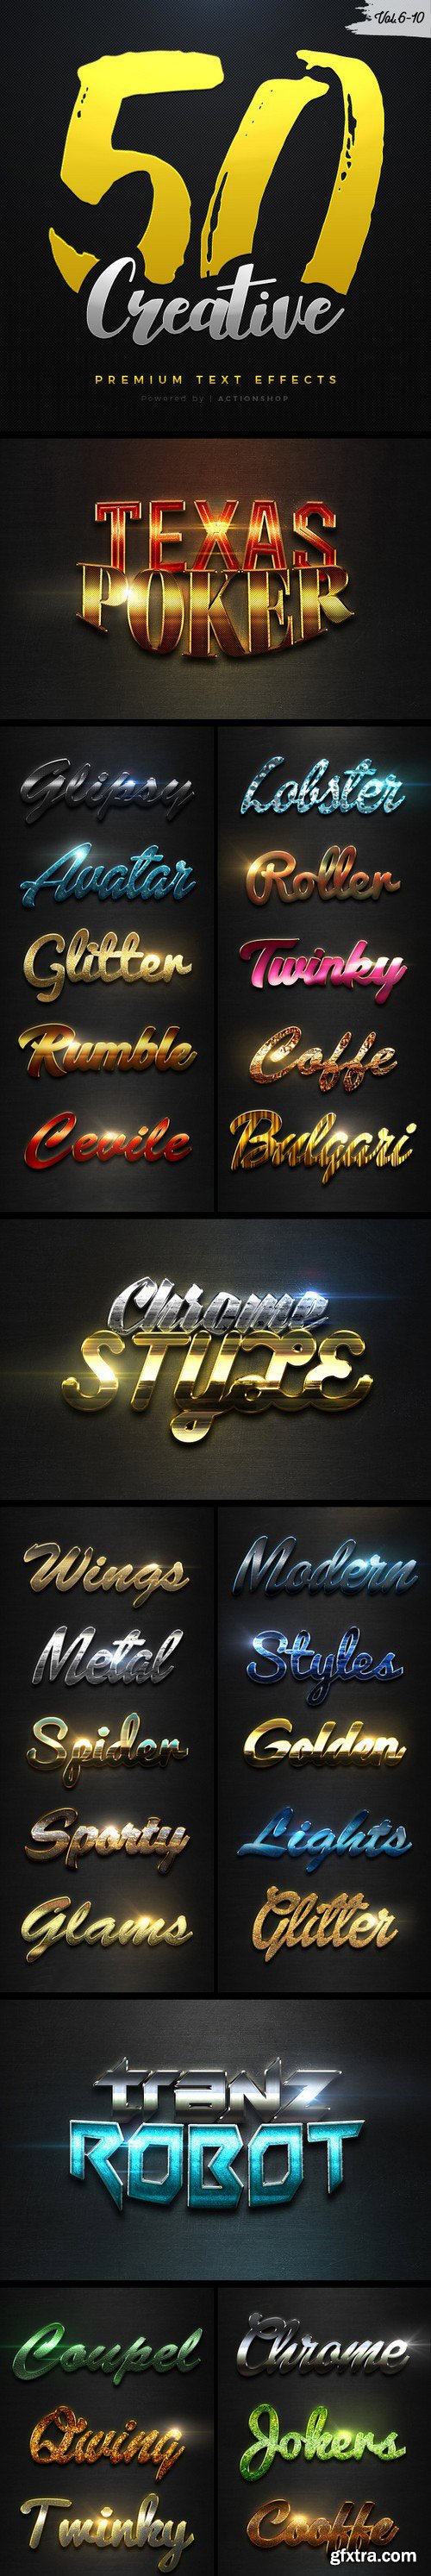 Graphicriver - 50 Creative Text Effects Bundle Two 21206282